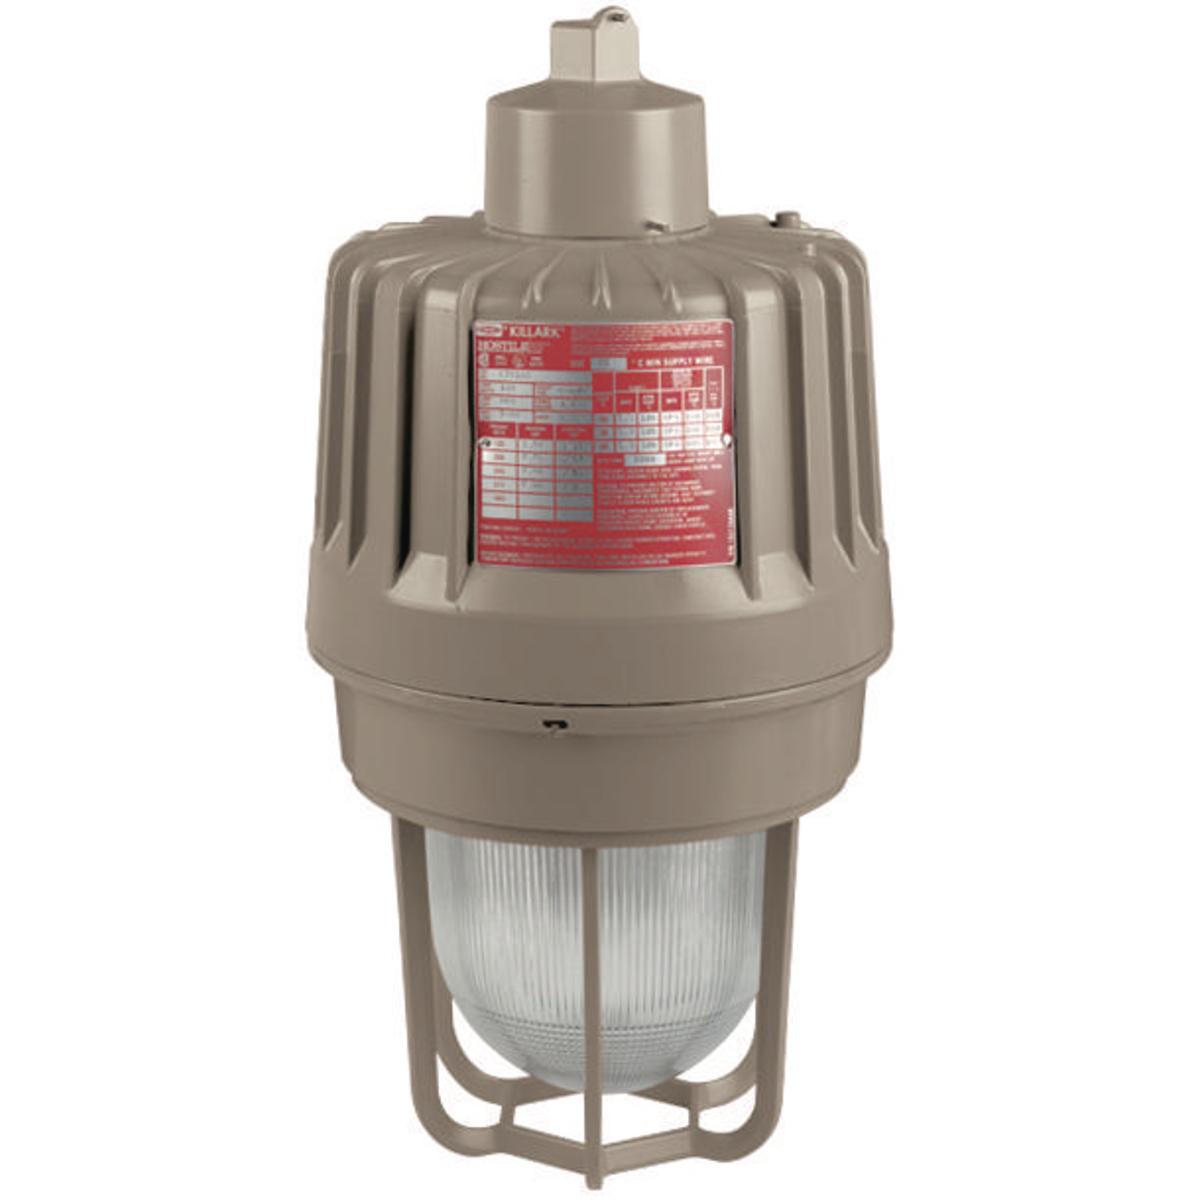 Hubbell EZS105A3G 100W 480V High Pressure Sodium 1" Pendant with Guard  ; Three light sources – High Pressure Sodium (50-400W), Metal Halide (70-400W) and Pulse Start Metal Halide (175-400W) ; Mounting choice –Pendant, ceiling, 25˚ stanchion or 90˚ wall mount, all with “wi